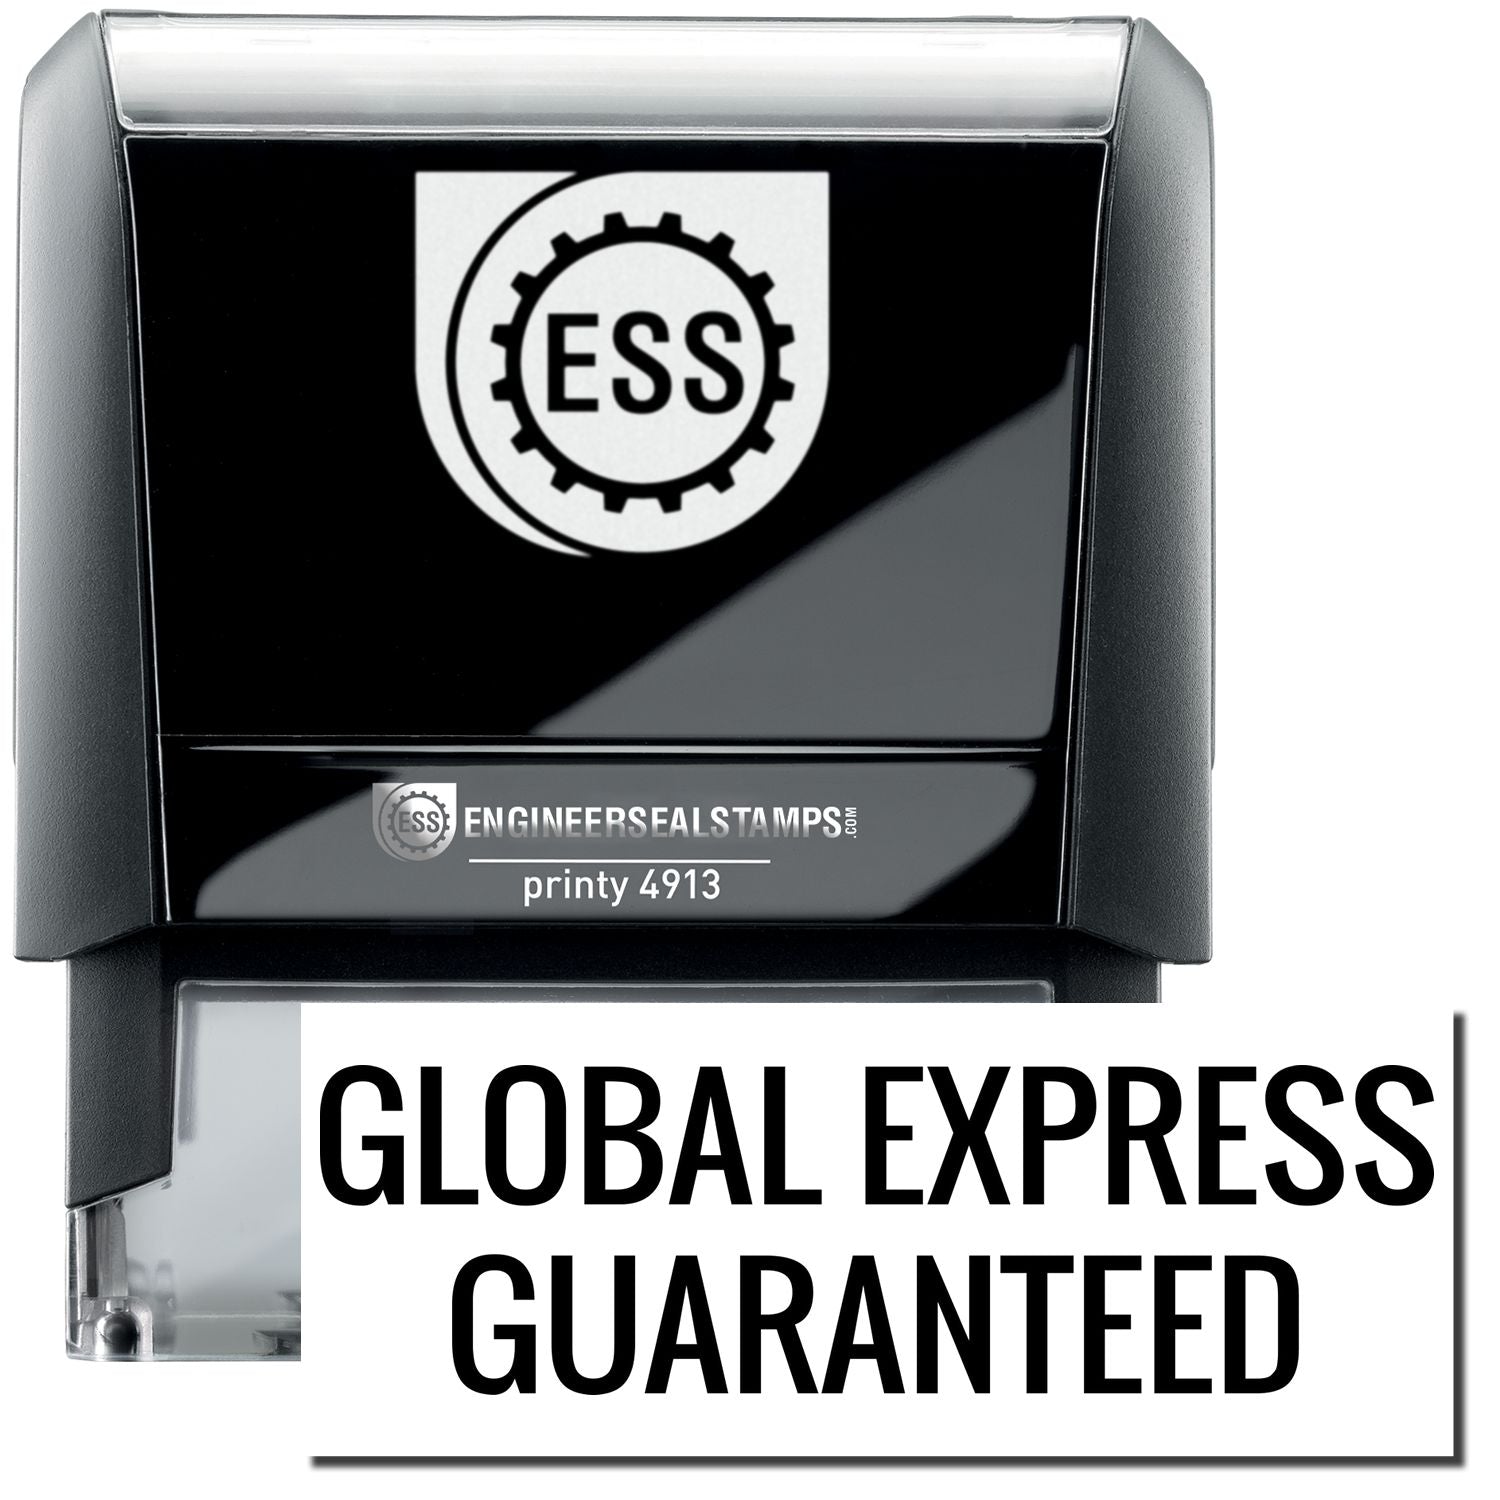 A self-inking stamp with a stamped image showing how the text "GLOBAL EXPRESS GUARANTEED" in a large font is displayed by it after stamping.